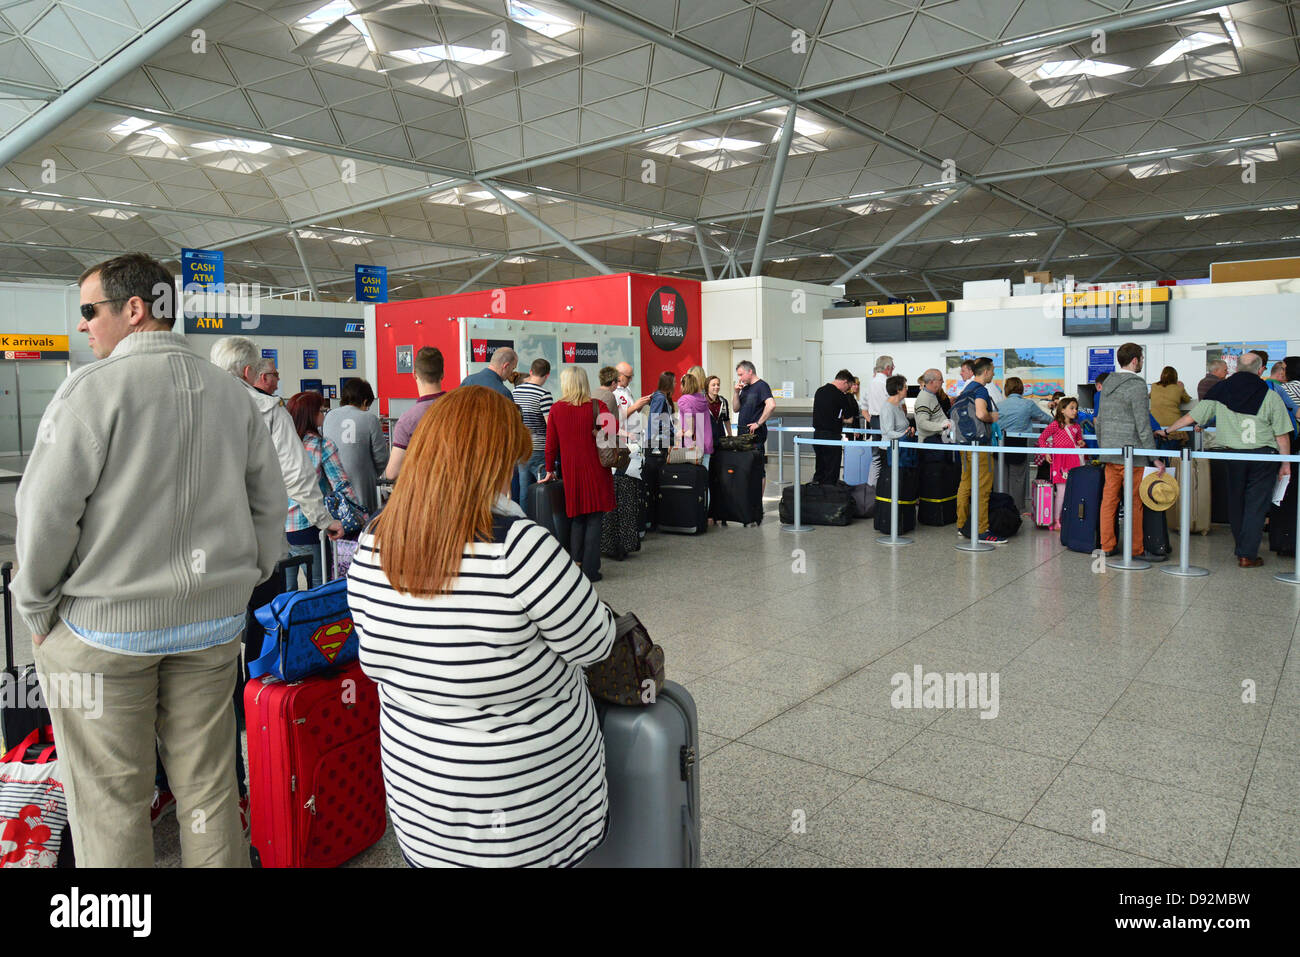 Queue at check-in desk in departure terminal, Stansted Airport, Stansted Mountfitchet, Essex, England, United Kingdom Stock Photo